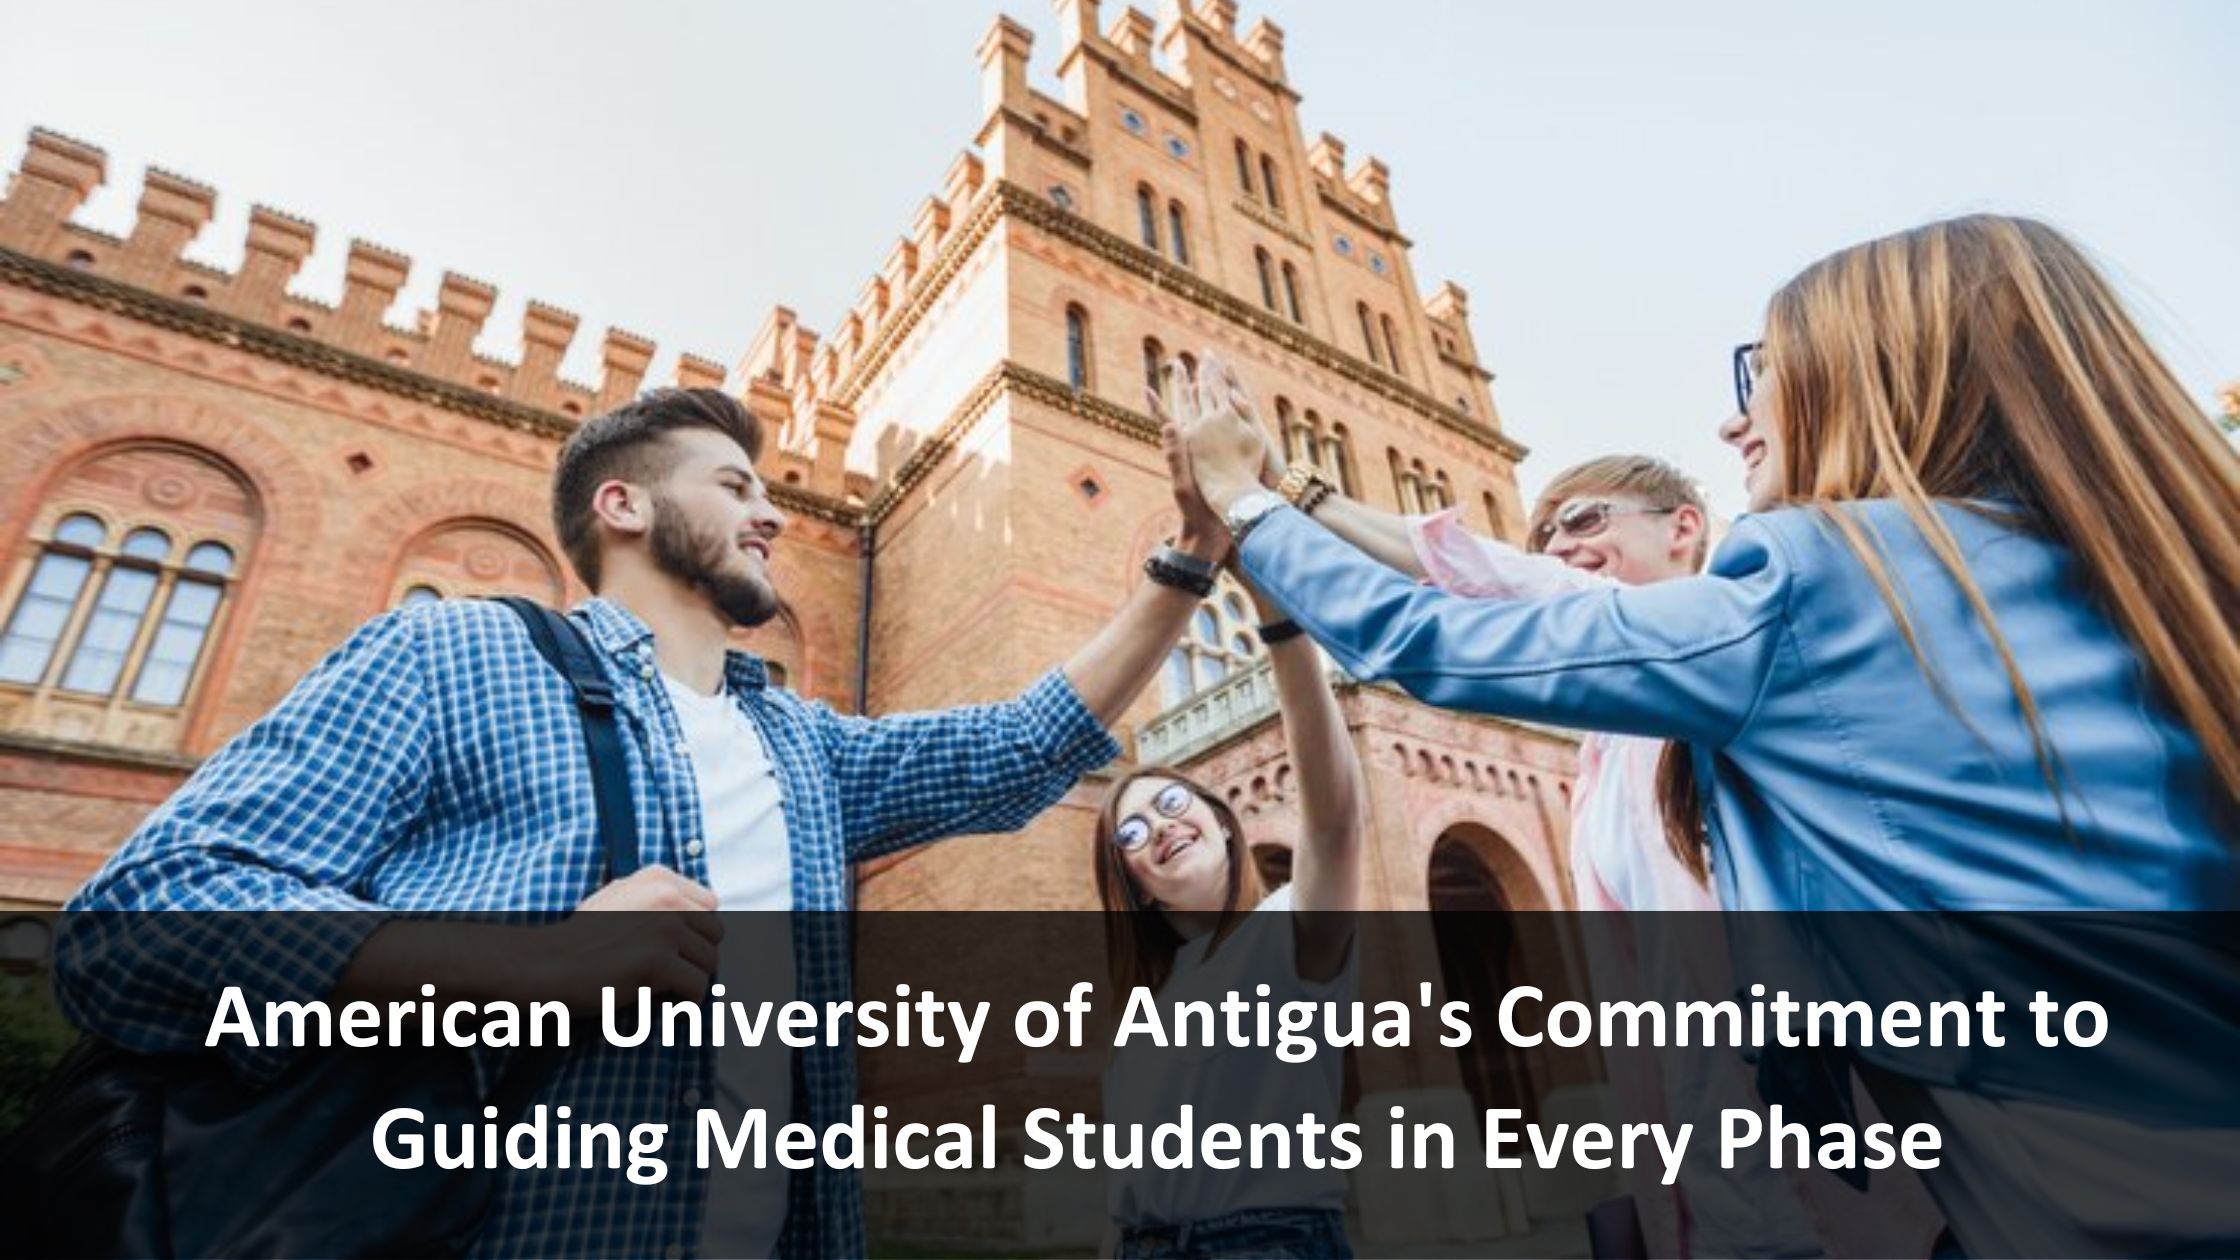 American University of Antigua’s Commitment to Guiding Medical Students in Every Phase